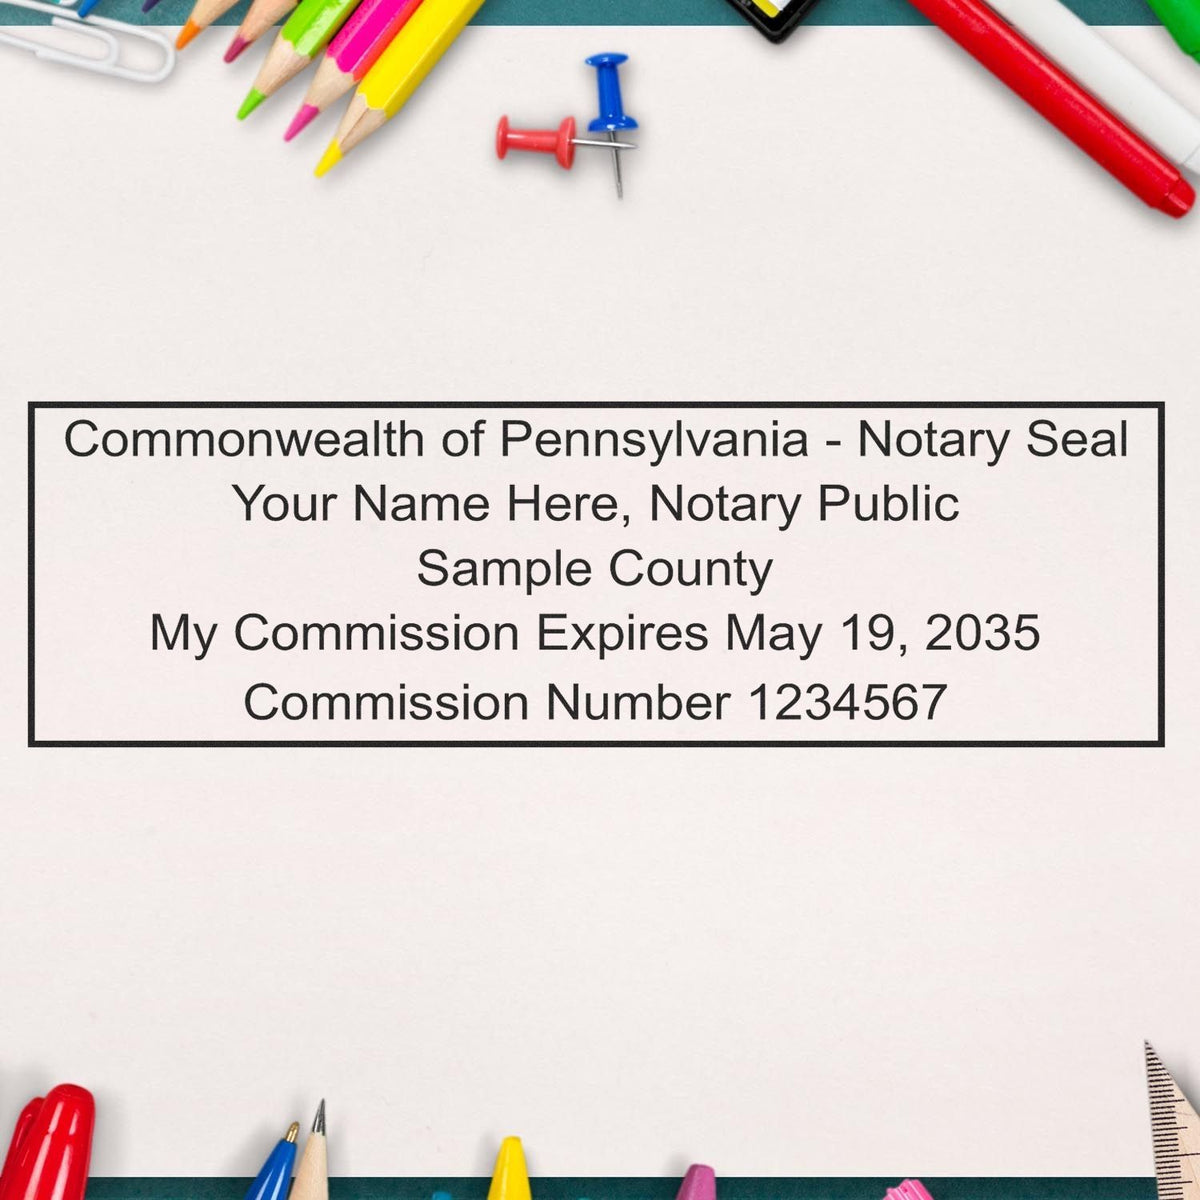 The Super Slim Pennsylvania Notary Public Stamp stamp impression comes to life with a crisp, detailed photo on paper - showcasing true professional quality.